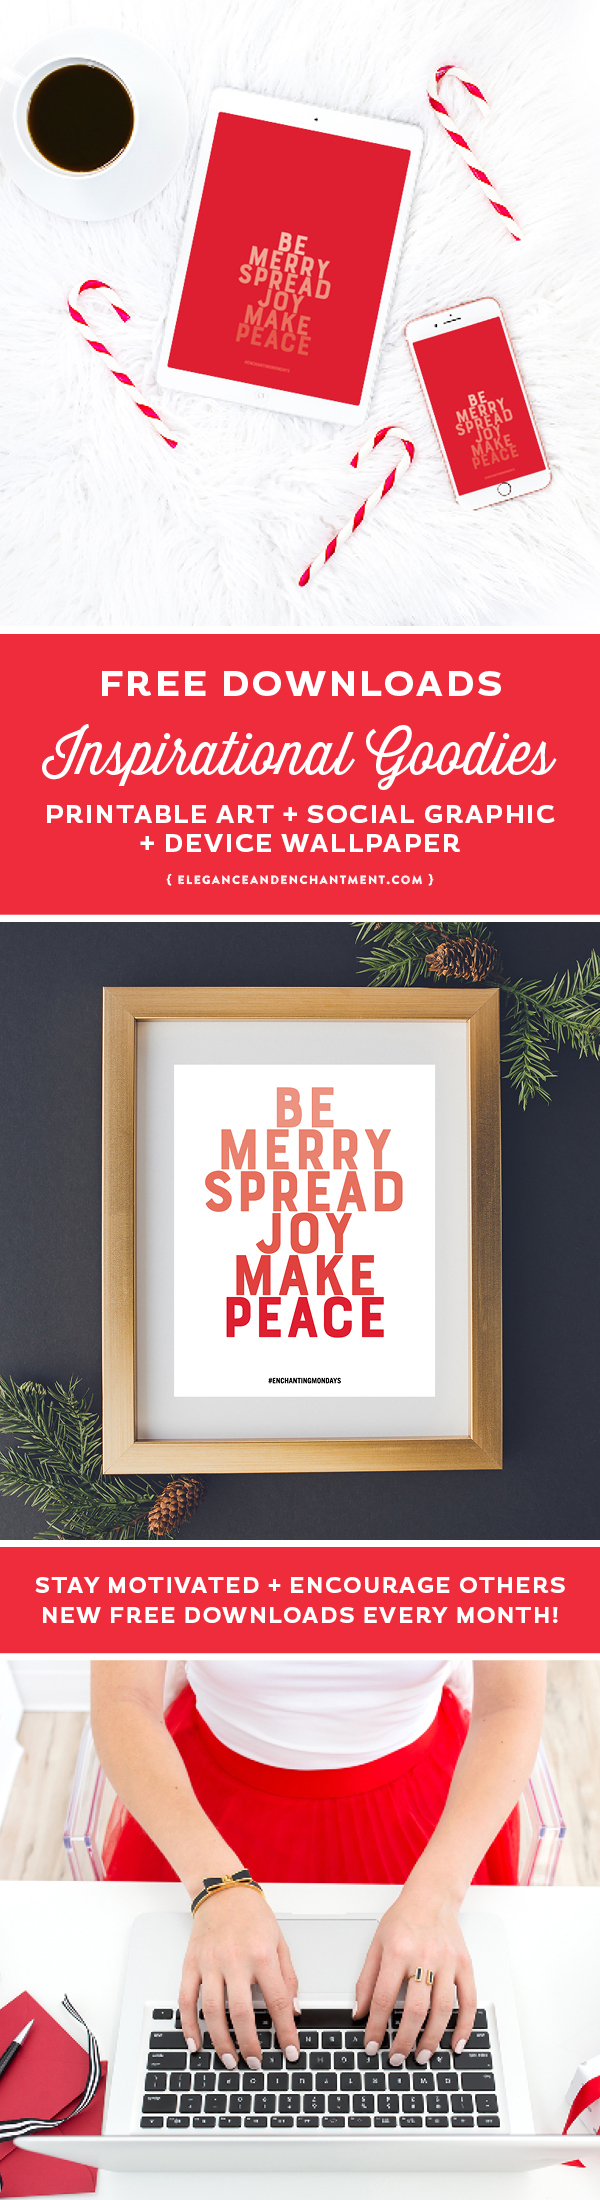 Be Merry. Spread Joy. Make Peace. Enjoy these free inspirational downloads including printable art, a social graphic, and device wallpaper for you phone, tablet and desktop. New motivational designs shared every month! Spread the love by sharing with a friend! // Designs from Elegance + Enchantment